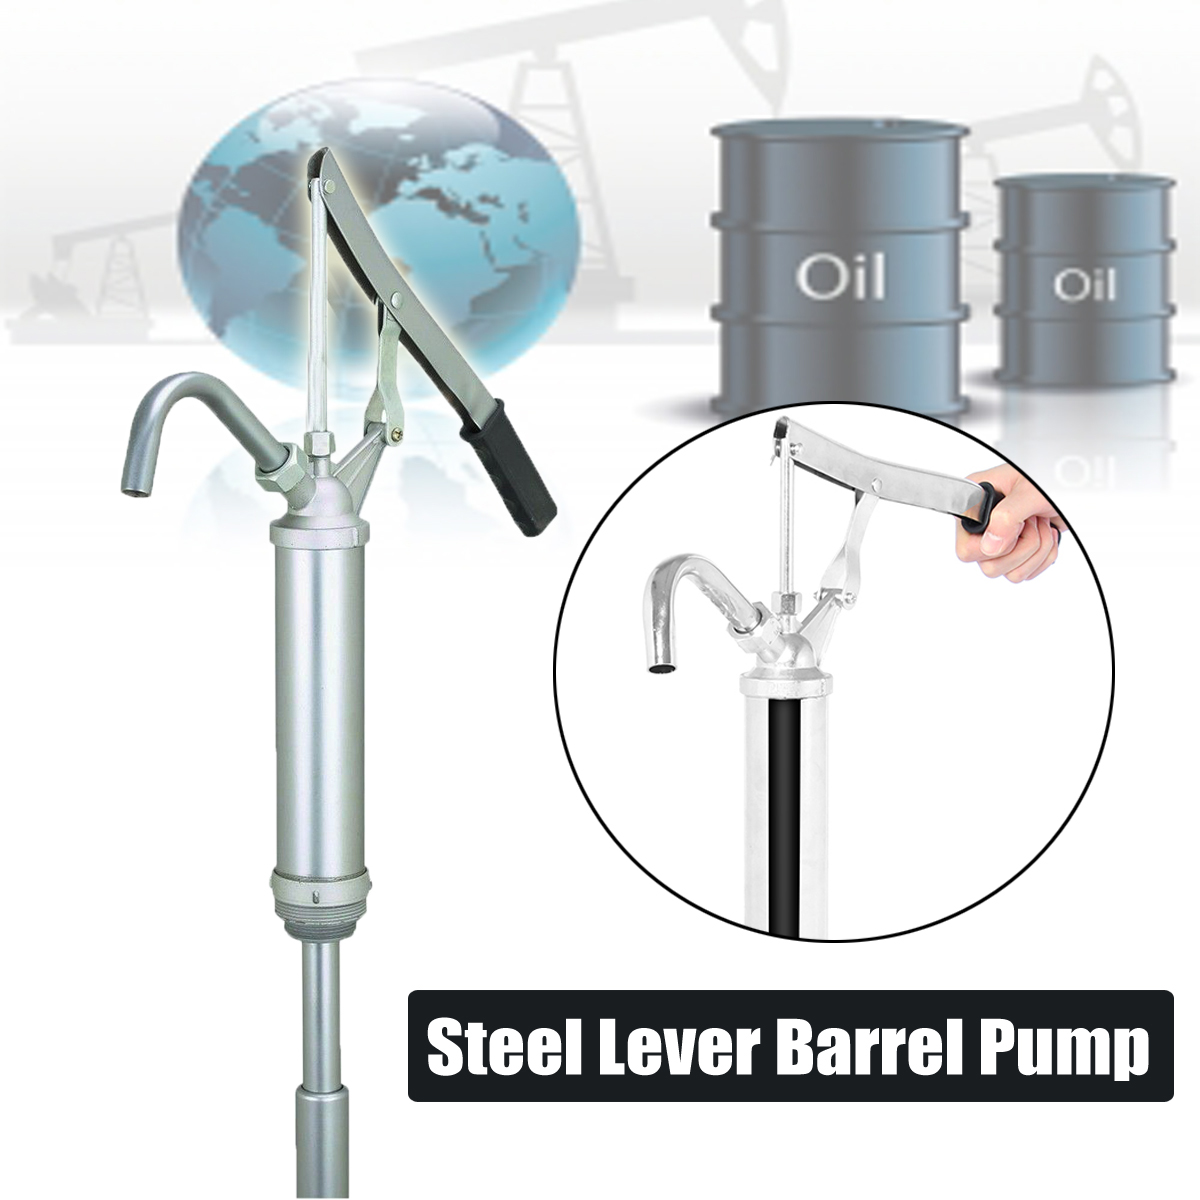 15-55 Gallon Drum Steel Lever Barrel Pump Lubricant Solvent 1 1/2 2 Telescopic Suction Tube For Drums Up 55 Gal